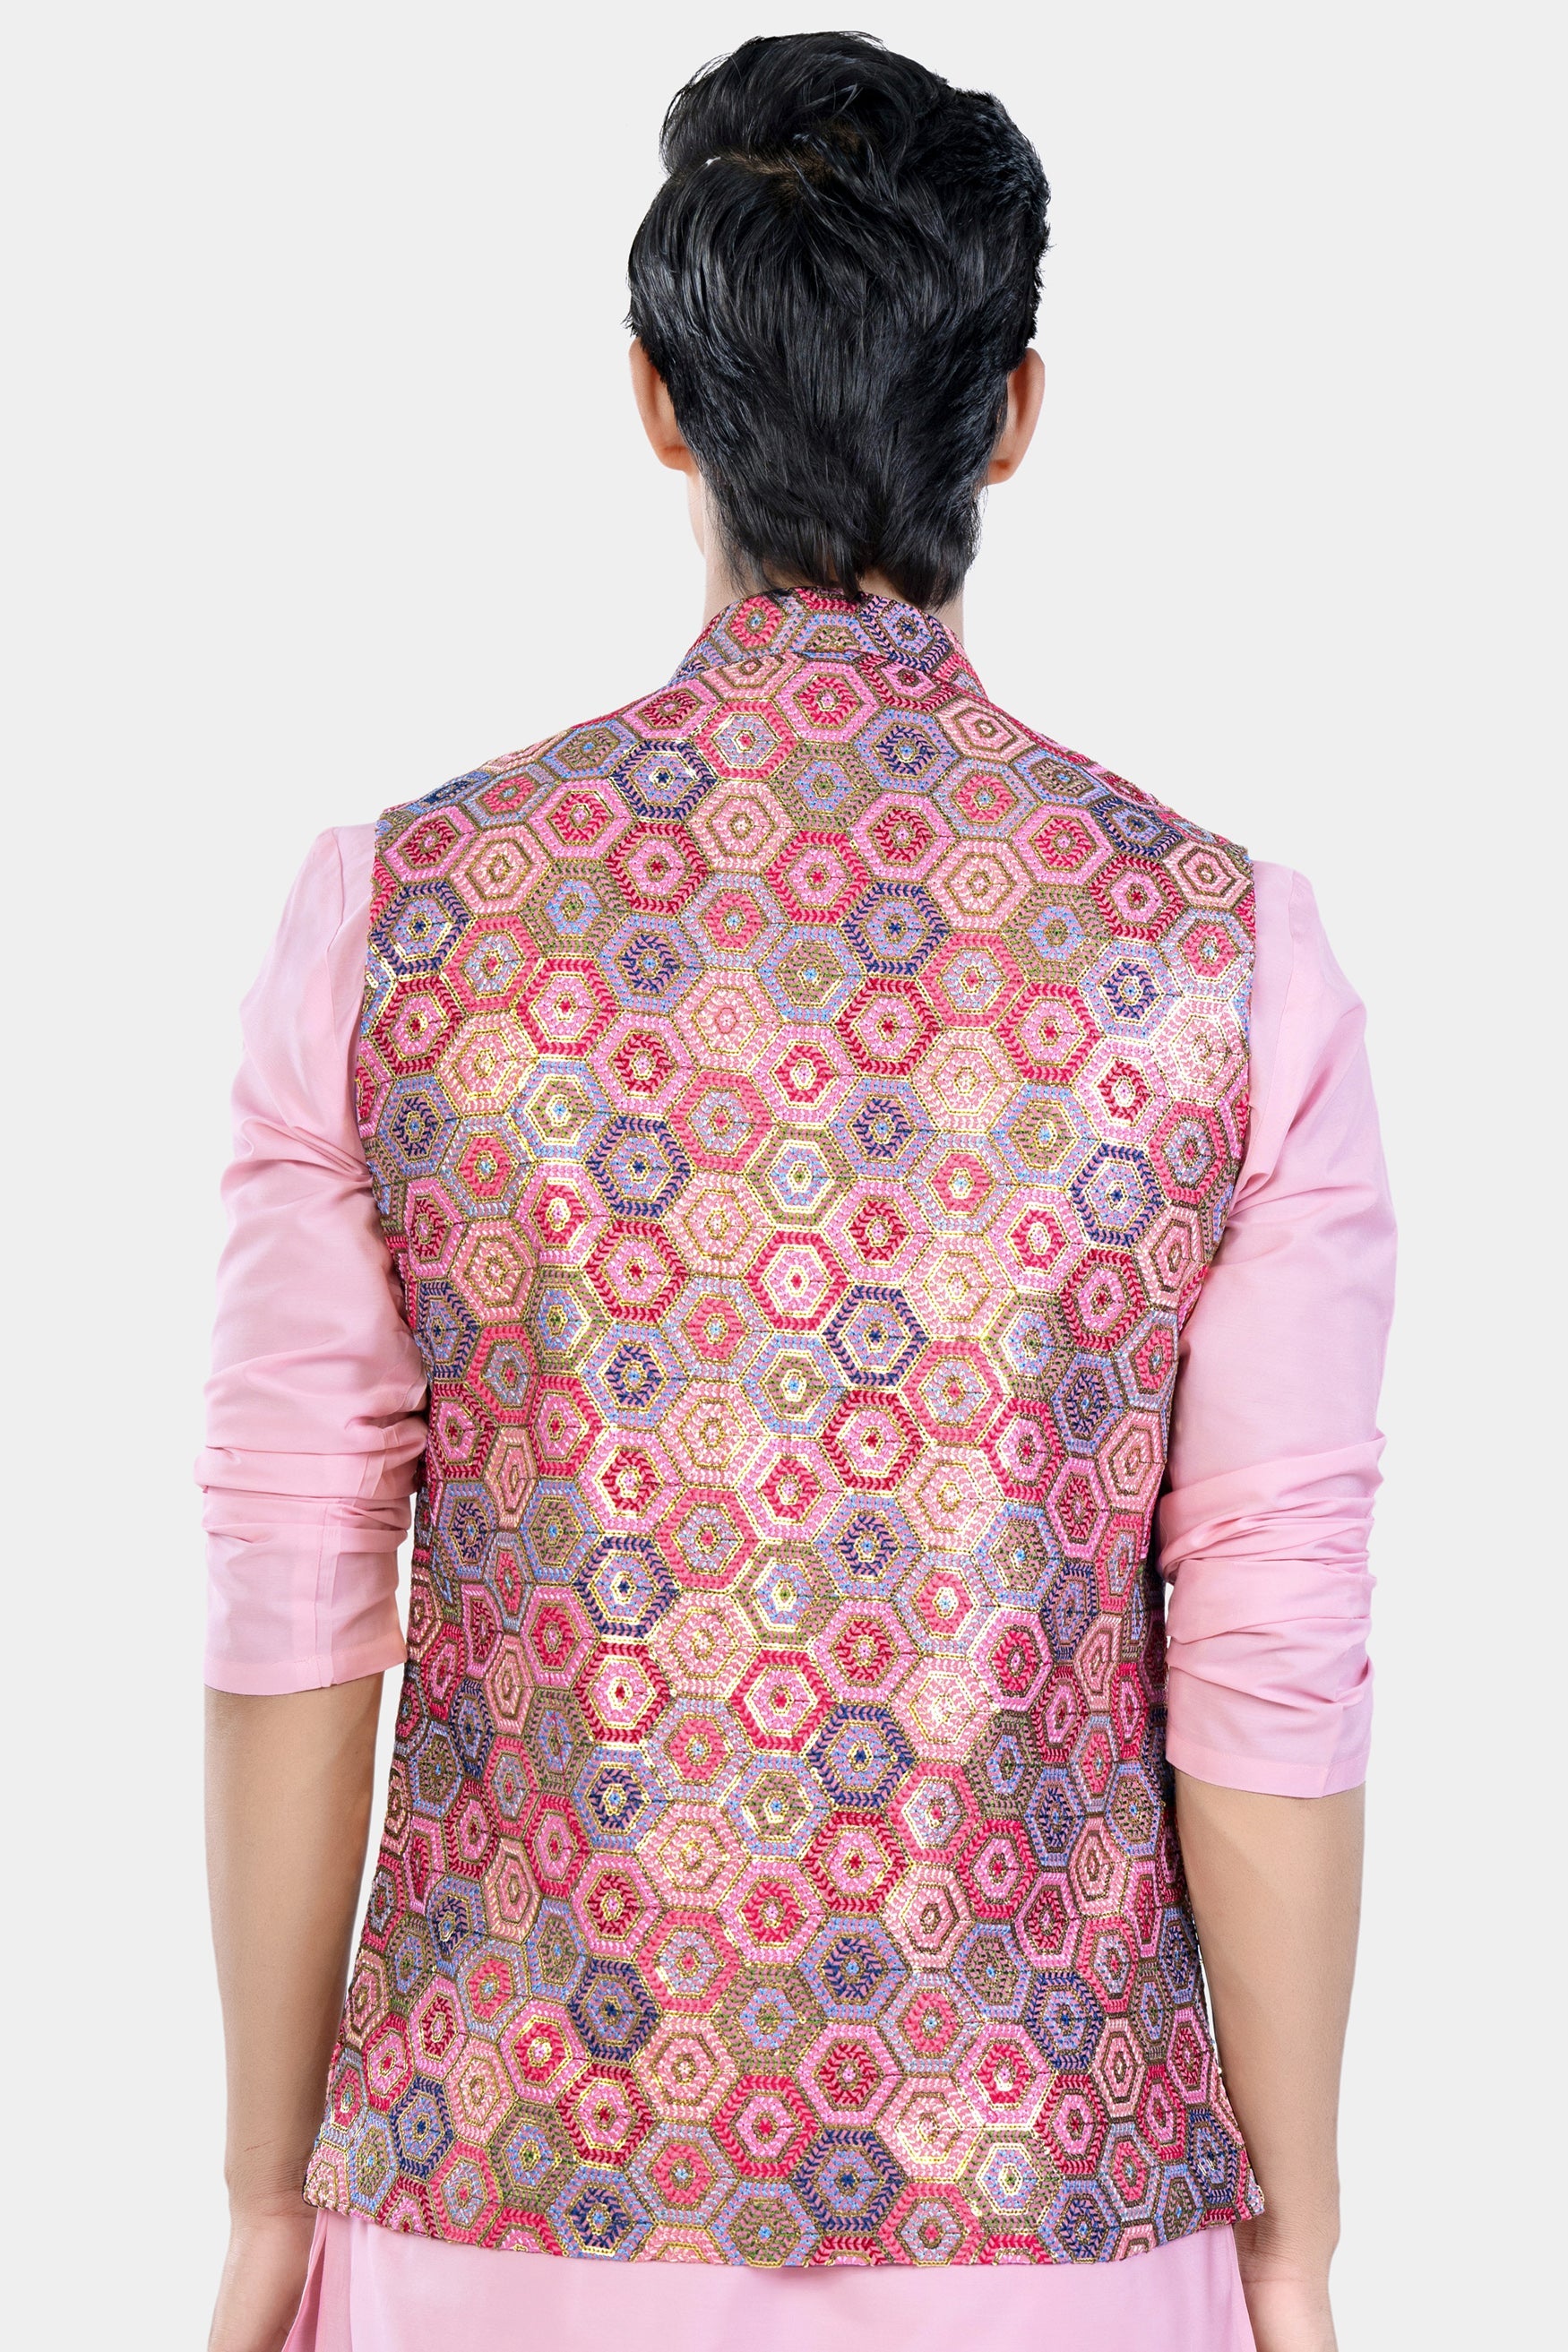 Radical Pink and Rhino Blue Multicolour Honeycomb Sequin and Thread Embroidered Designer Nehru Jacket WC3469-36,  WC3469-38,  WC3469-40,  WC3469-42,  WC3469-44,  WC3469-46,  WC3469-48,  WC3469-50,  WC3469-52,  WC3469-54,  WC3469-56,  WC3469-58,  WC3469-60